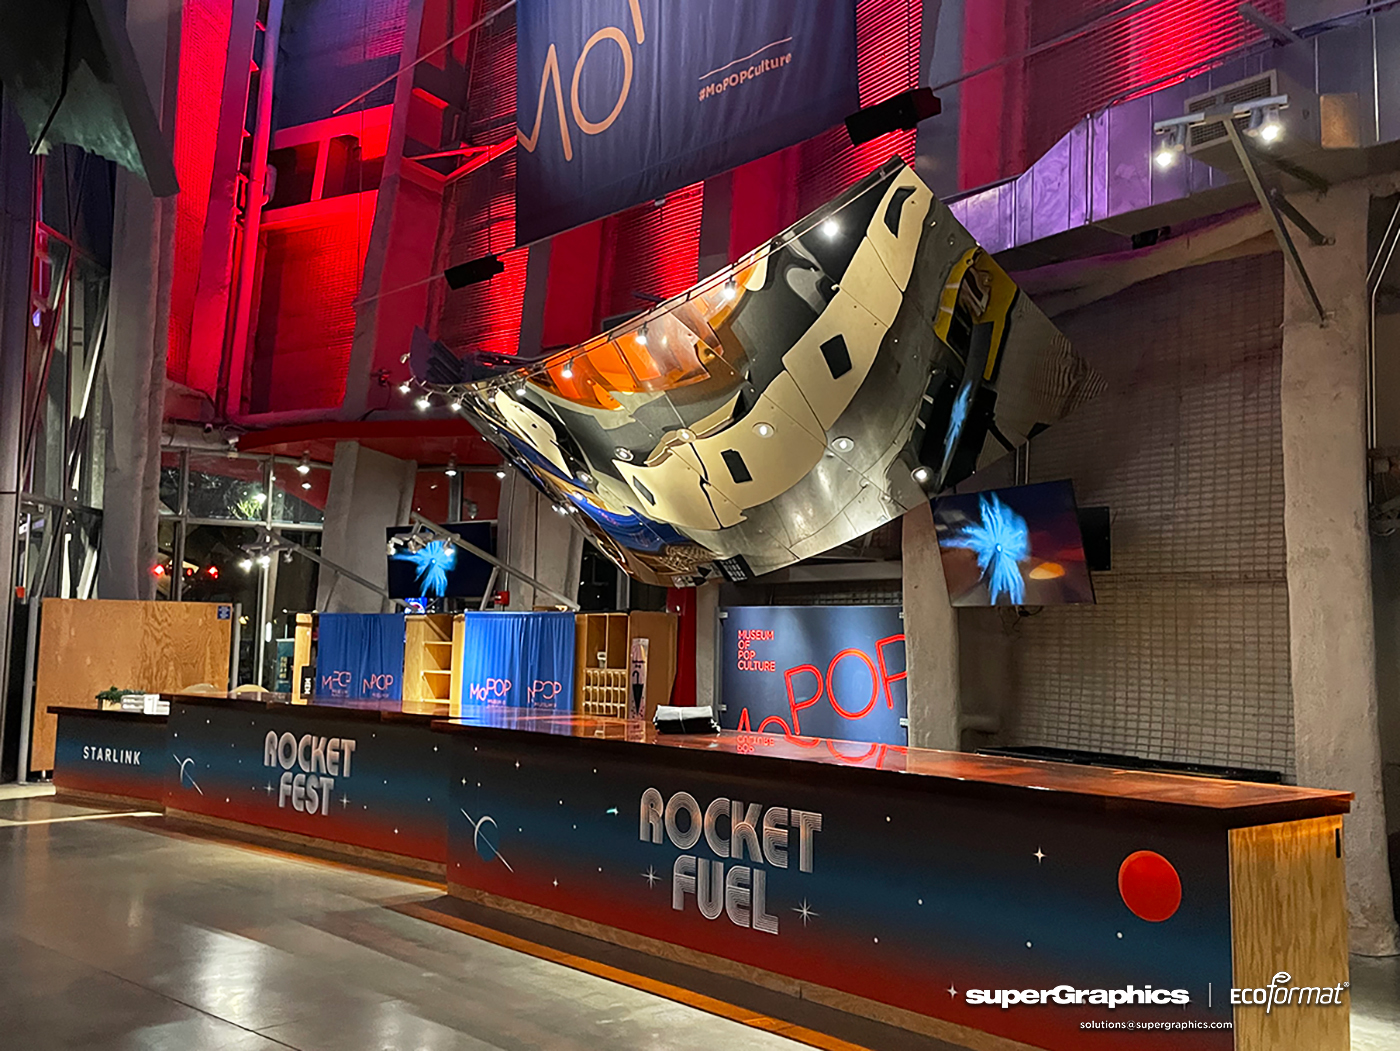 Reception area for SpaceX event with different bar wraps.